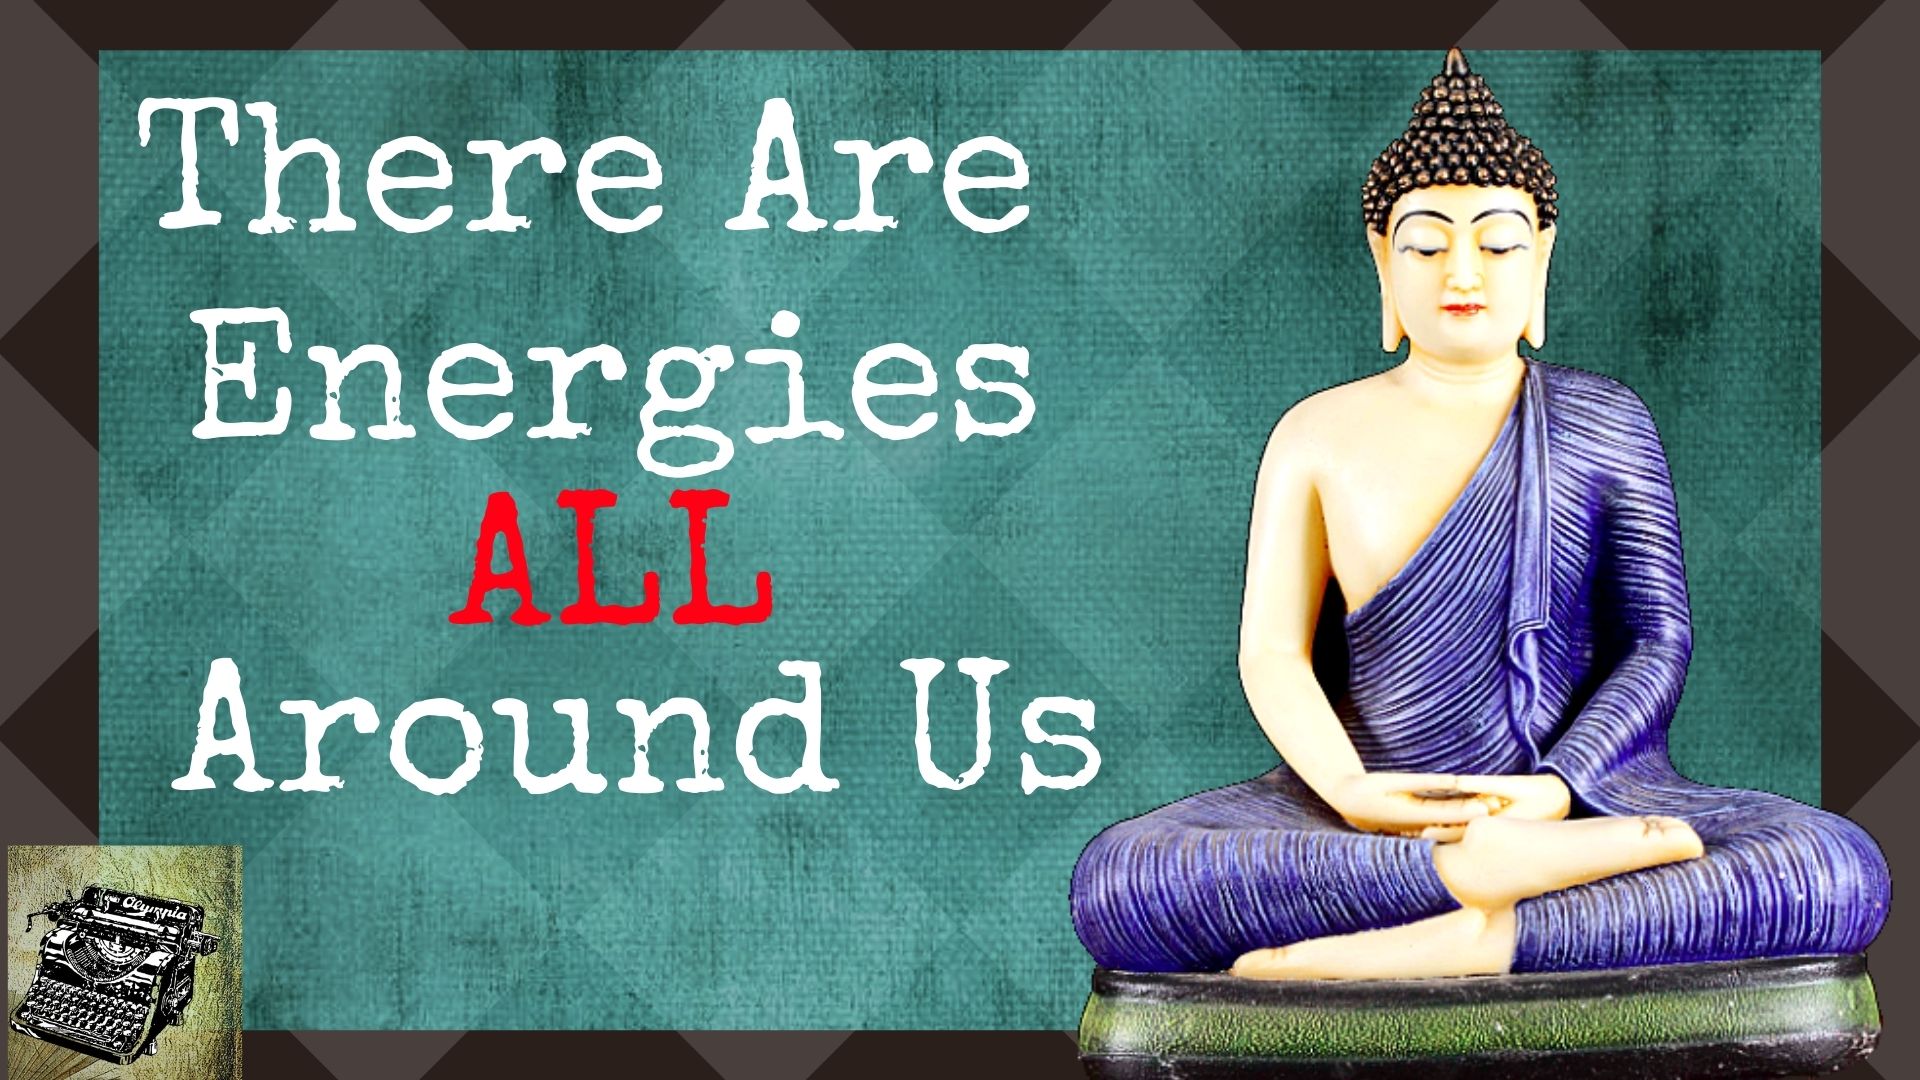 Pay Attention: There Are Informative Energies All Around Us